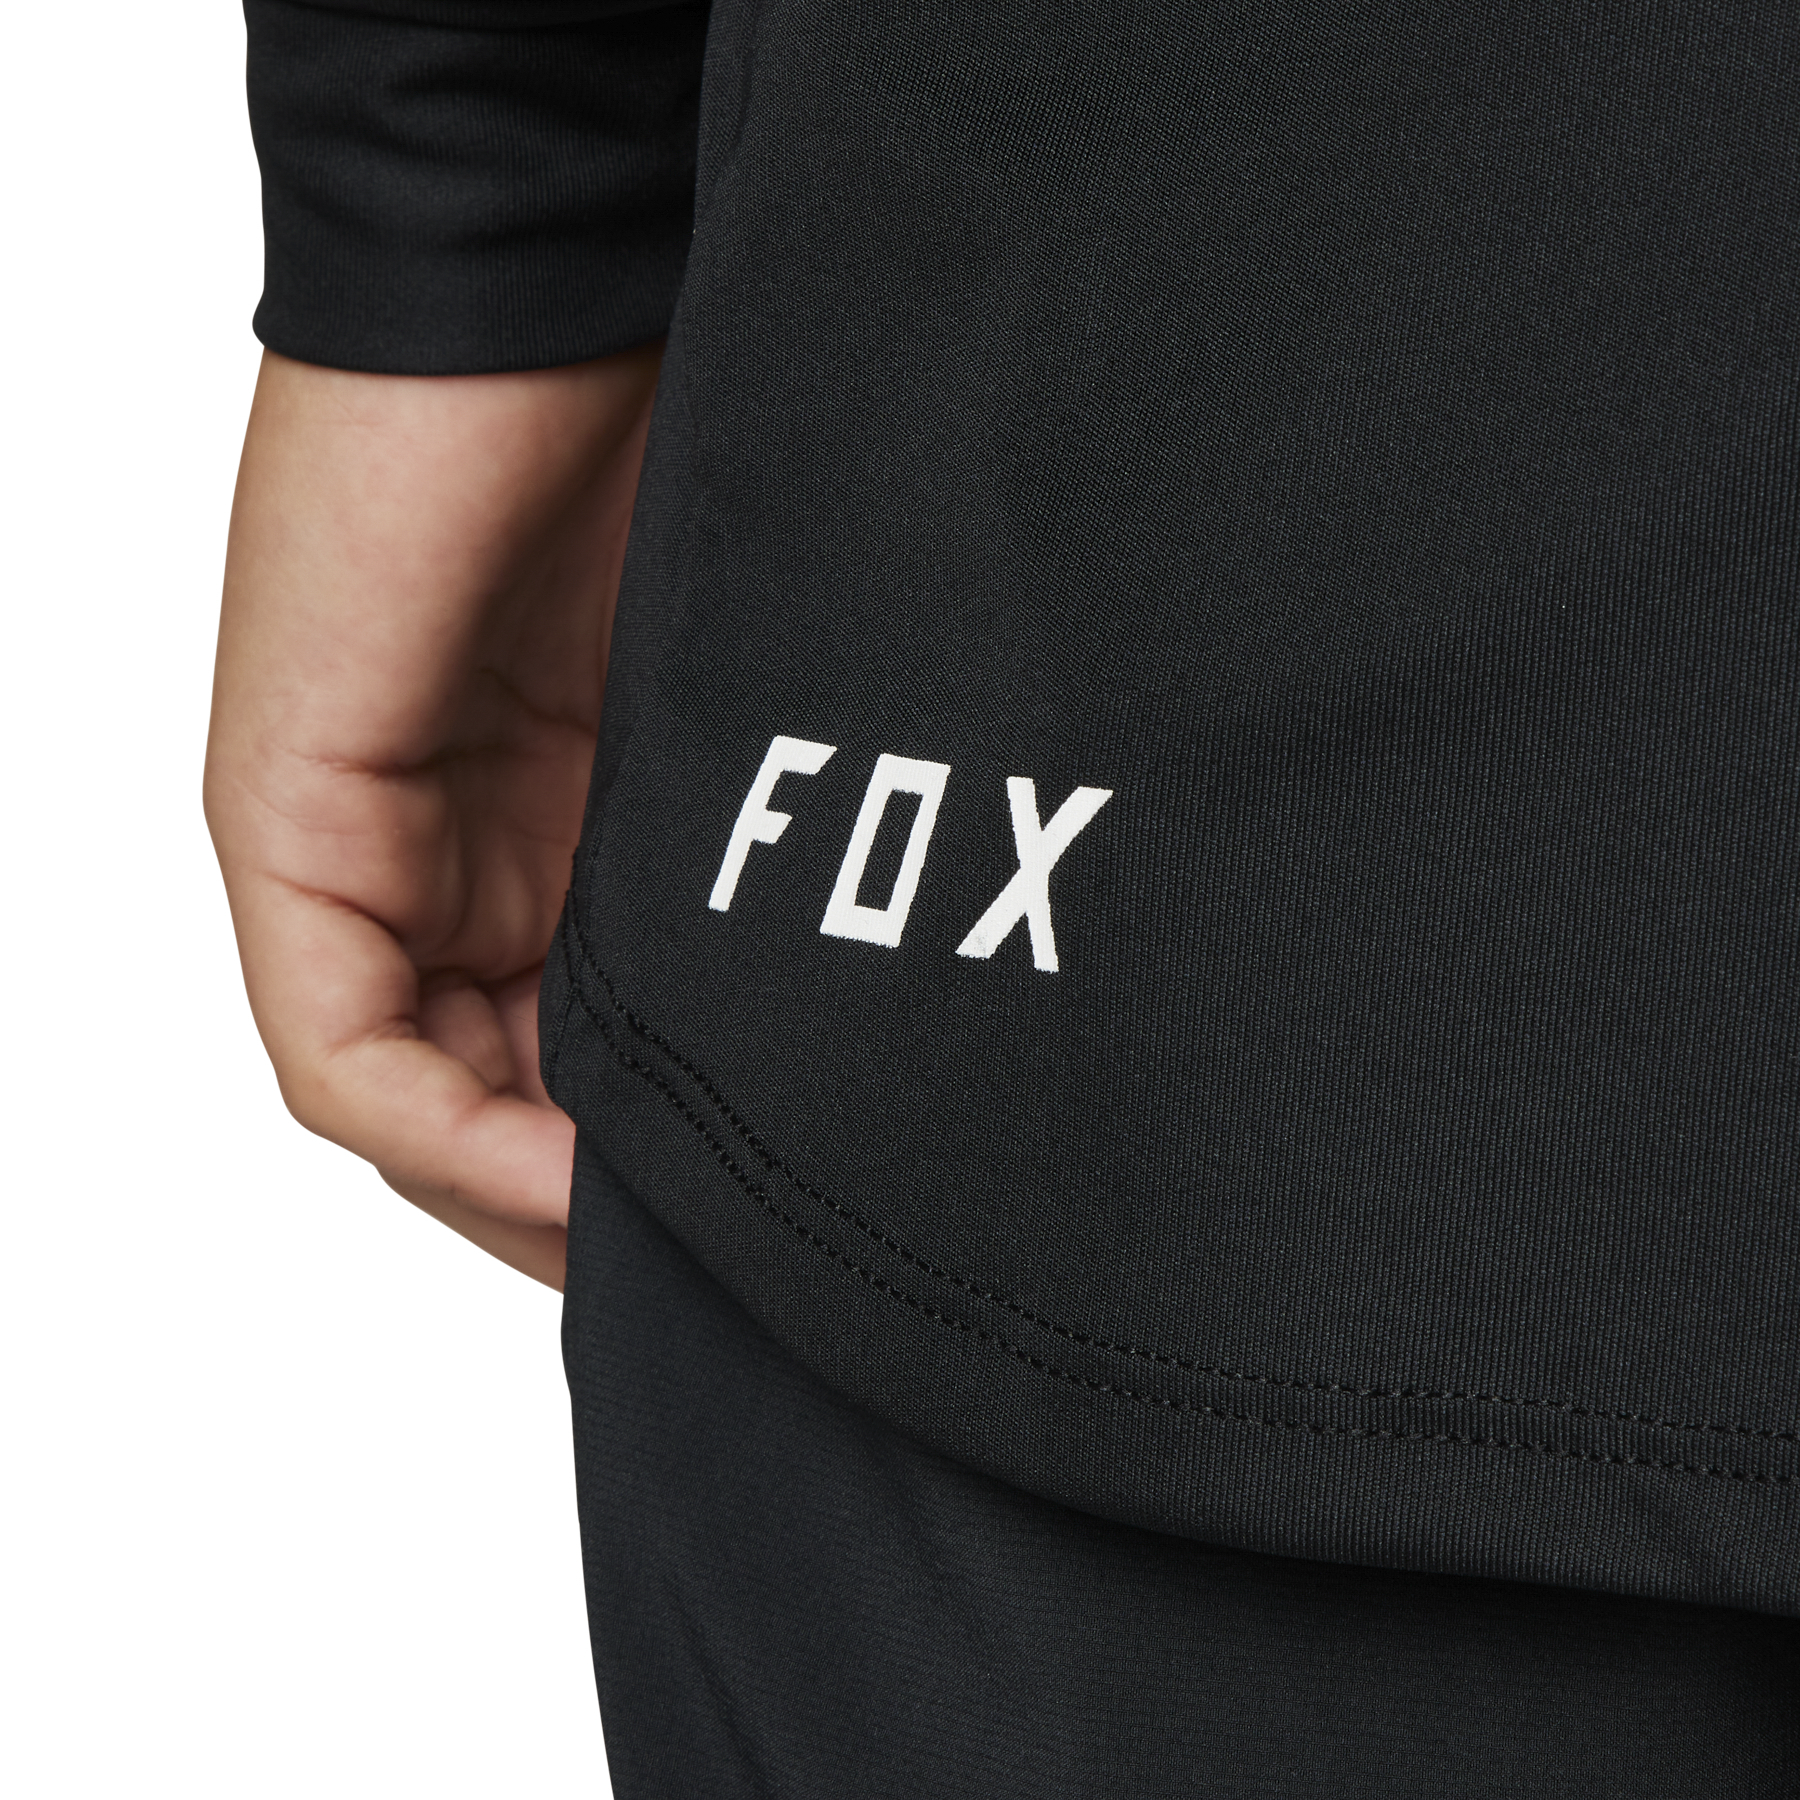 Fox Ranger Youth Long Sleeve Jersey - Youth S - Black - Image 5